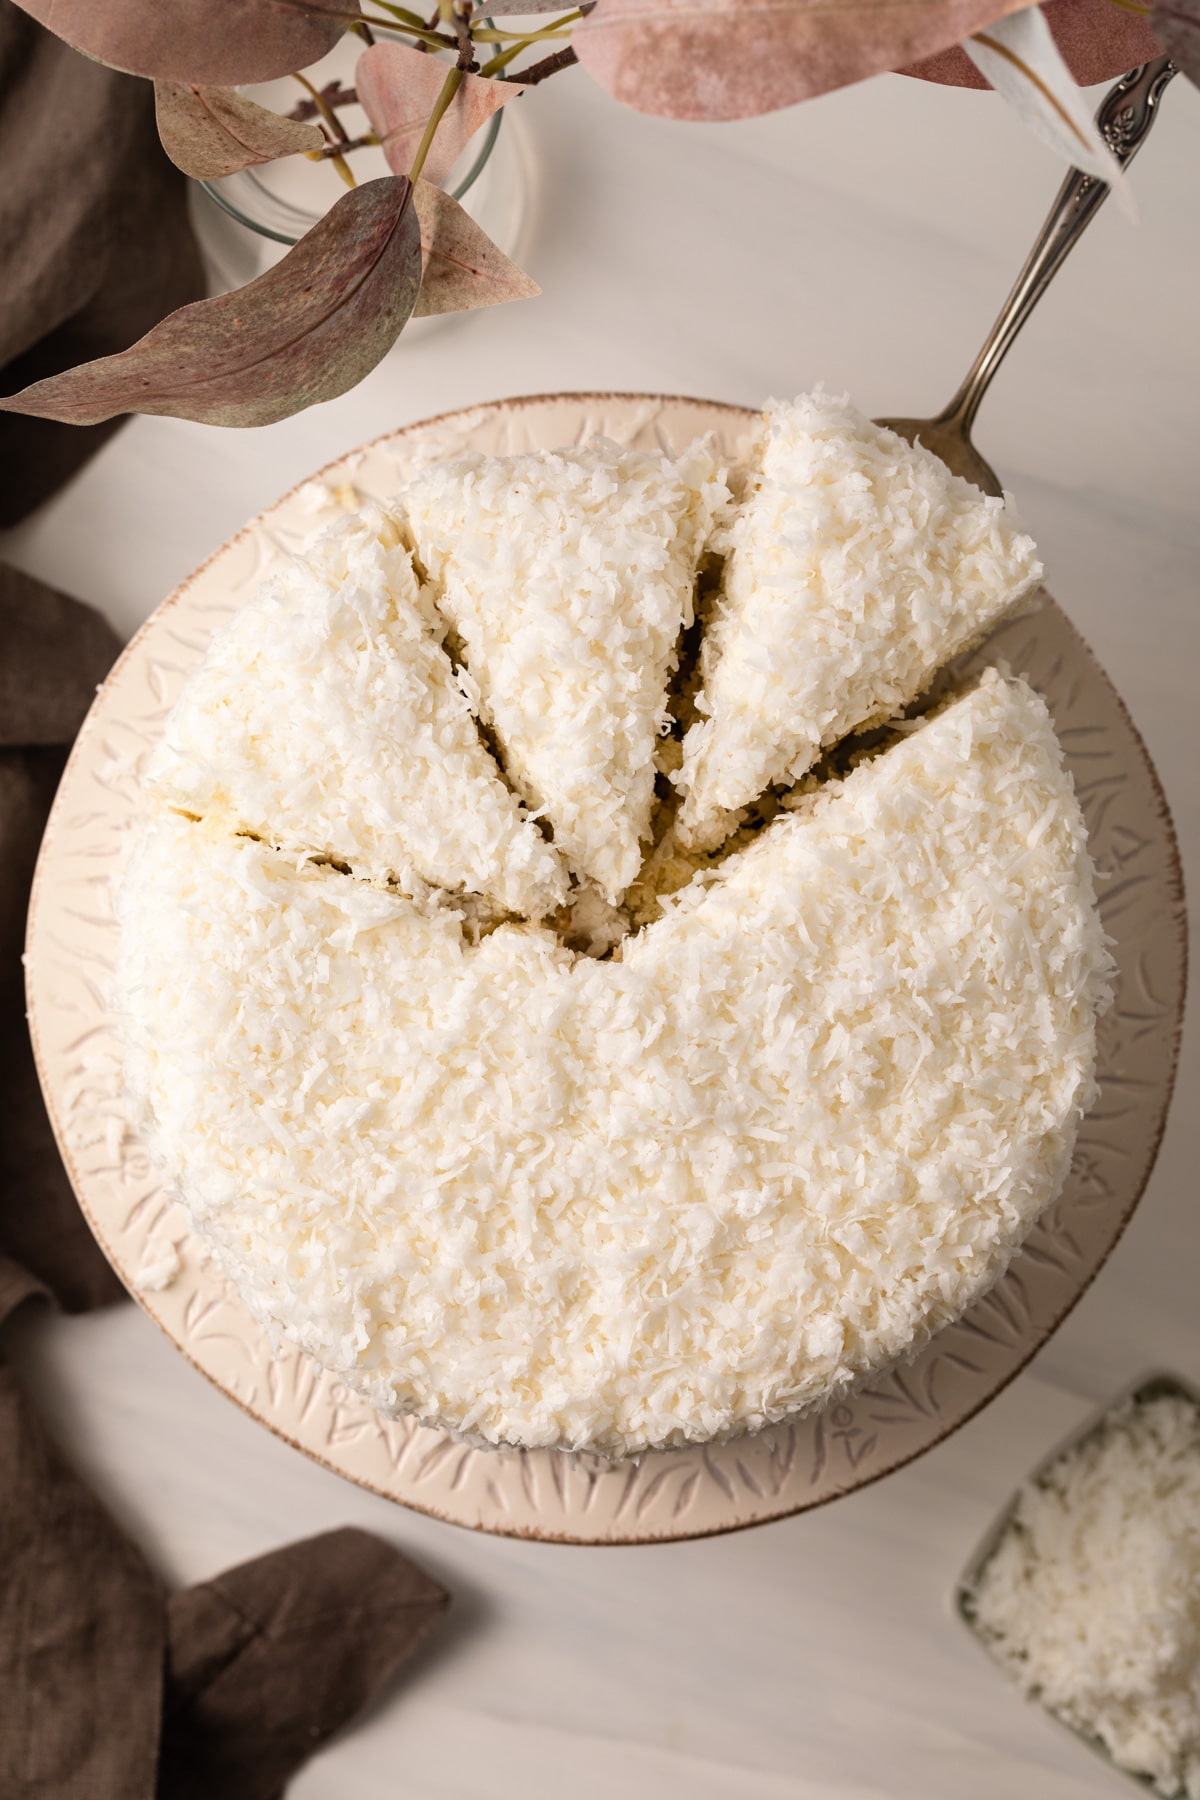 Overhead view of coconut cake with slices cut out.